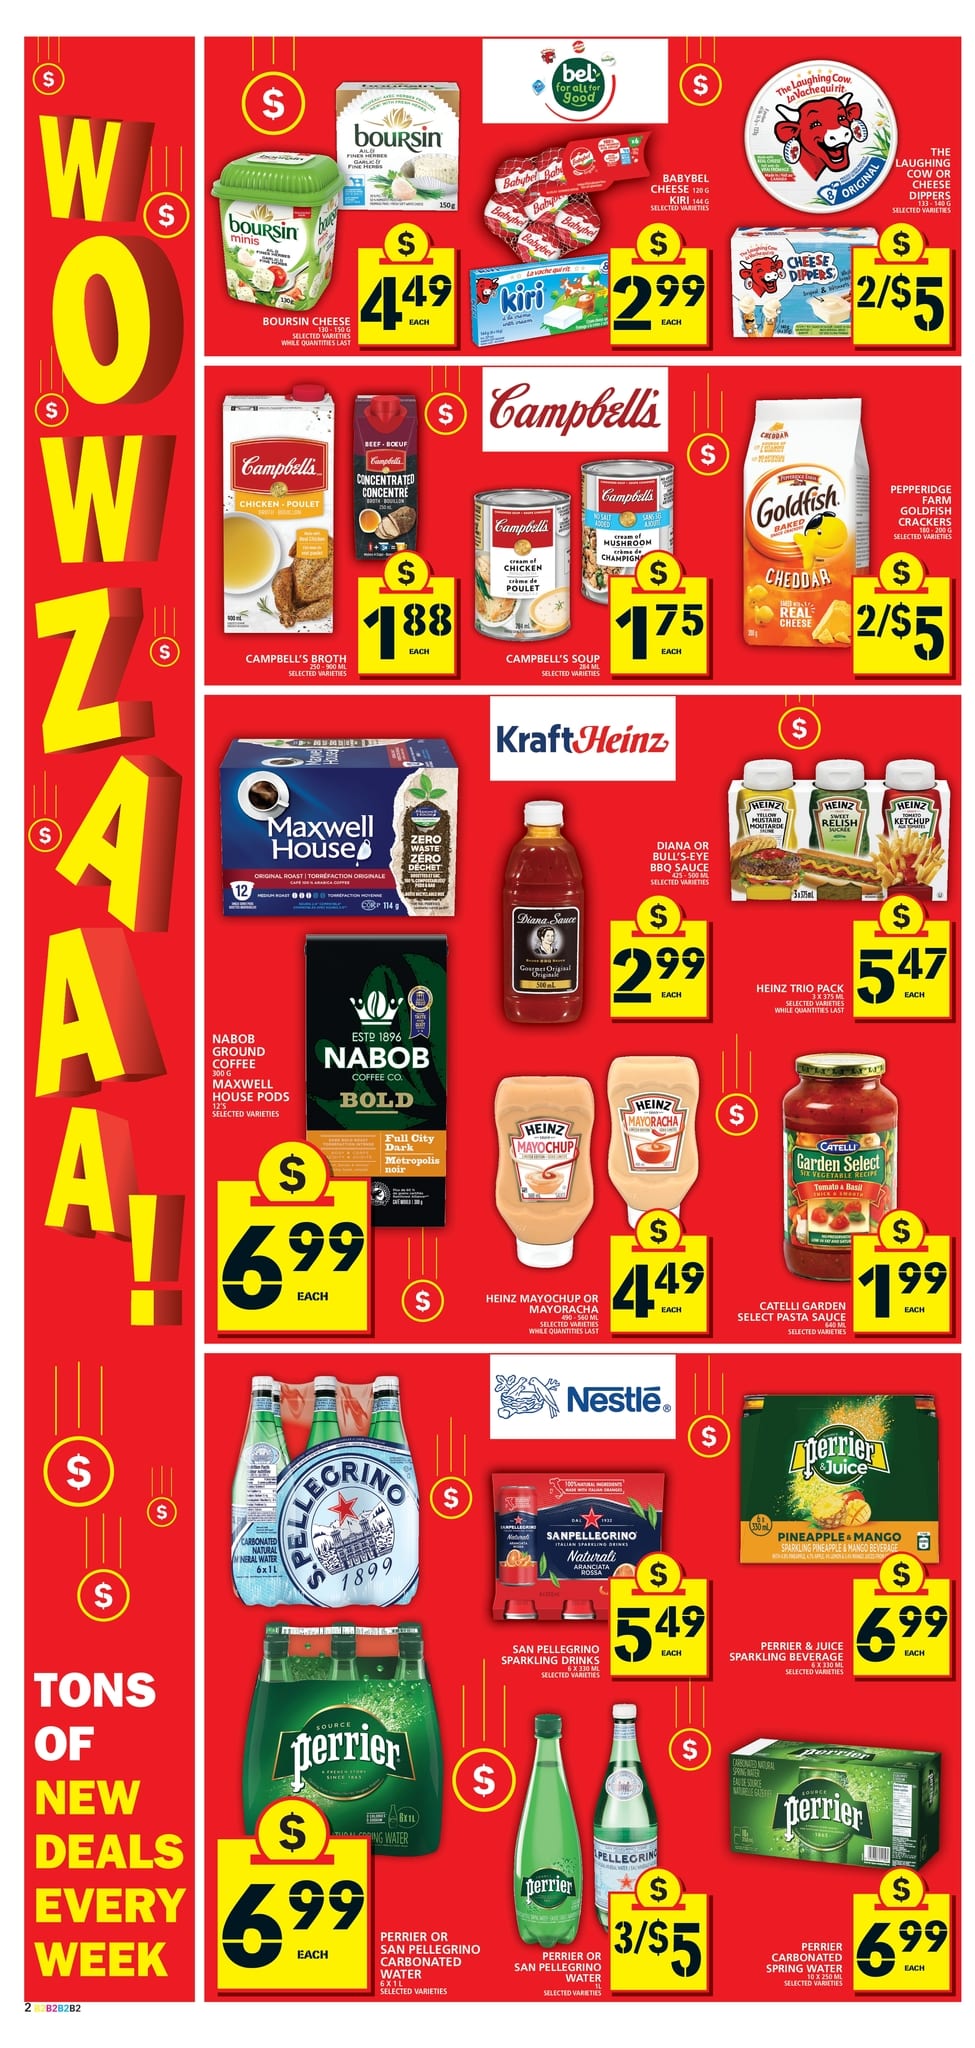 Food Basics - Weekly Flyer Specials - Page 3